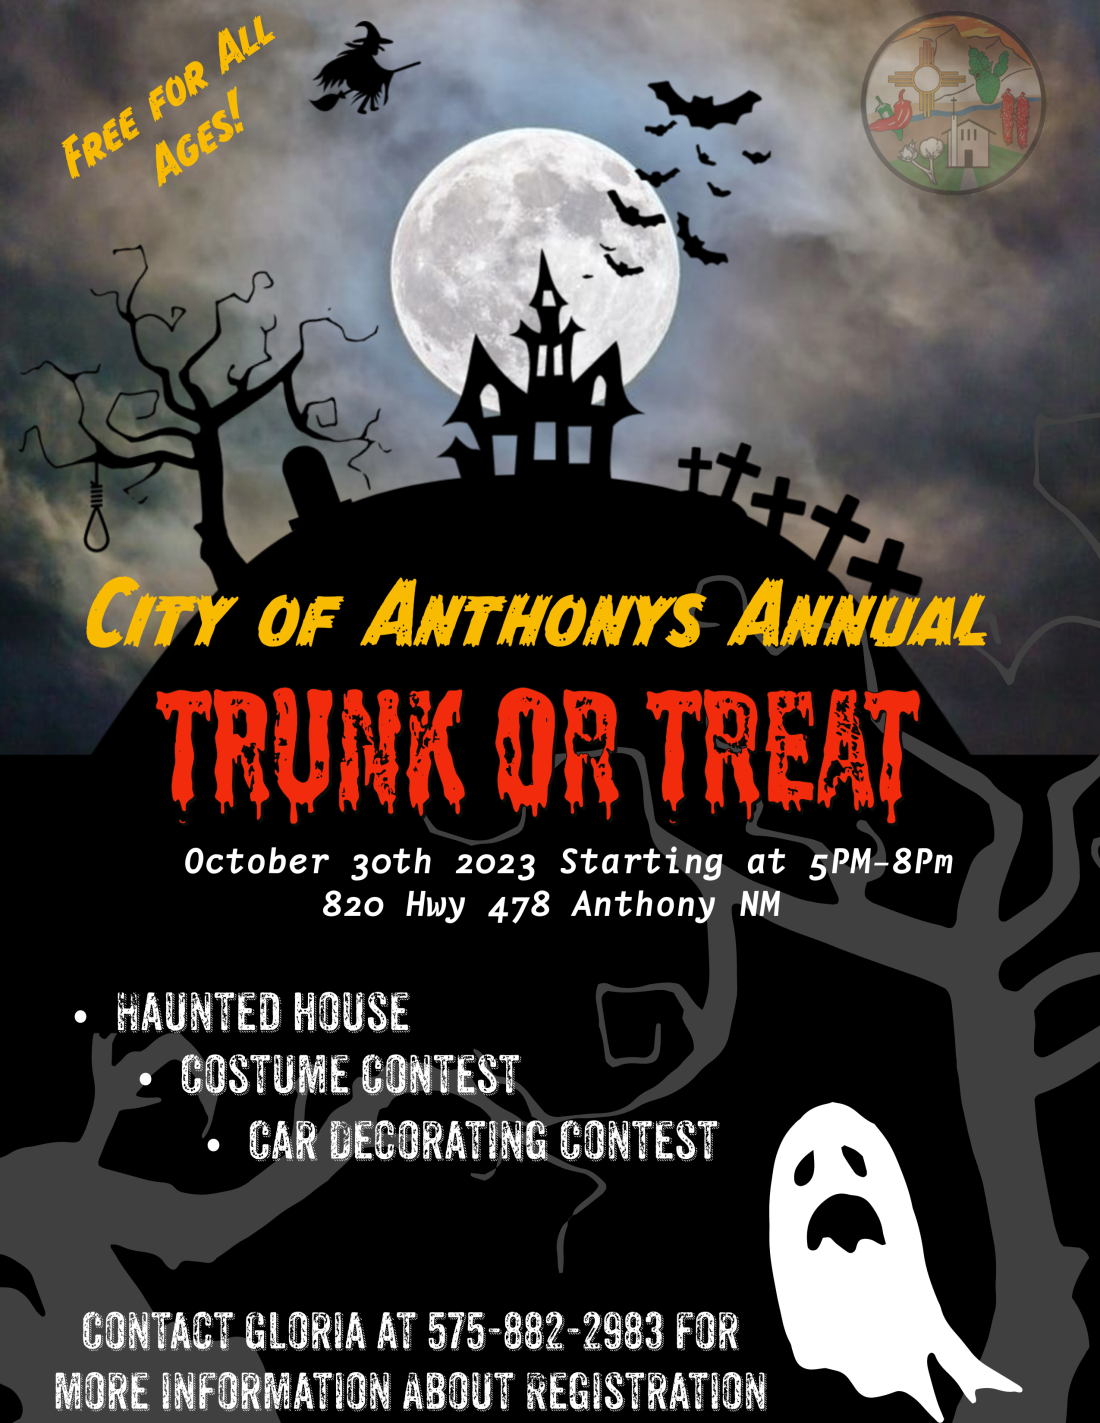 Trunk or Treat Flyer